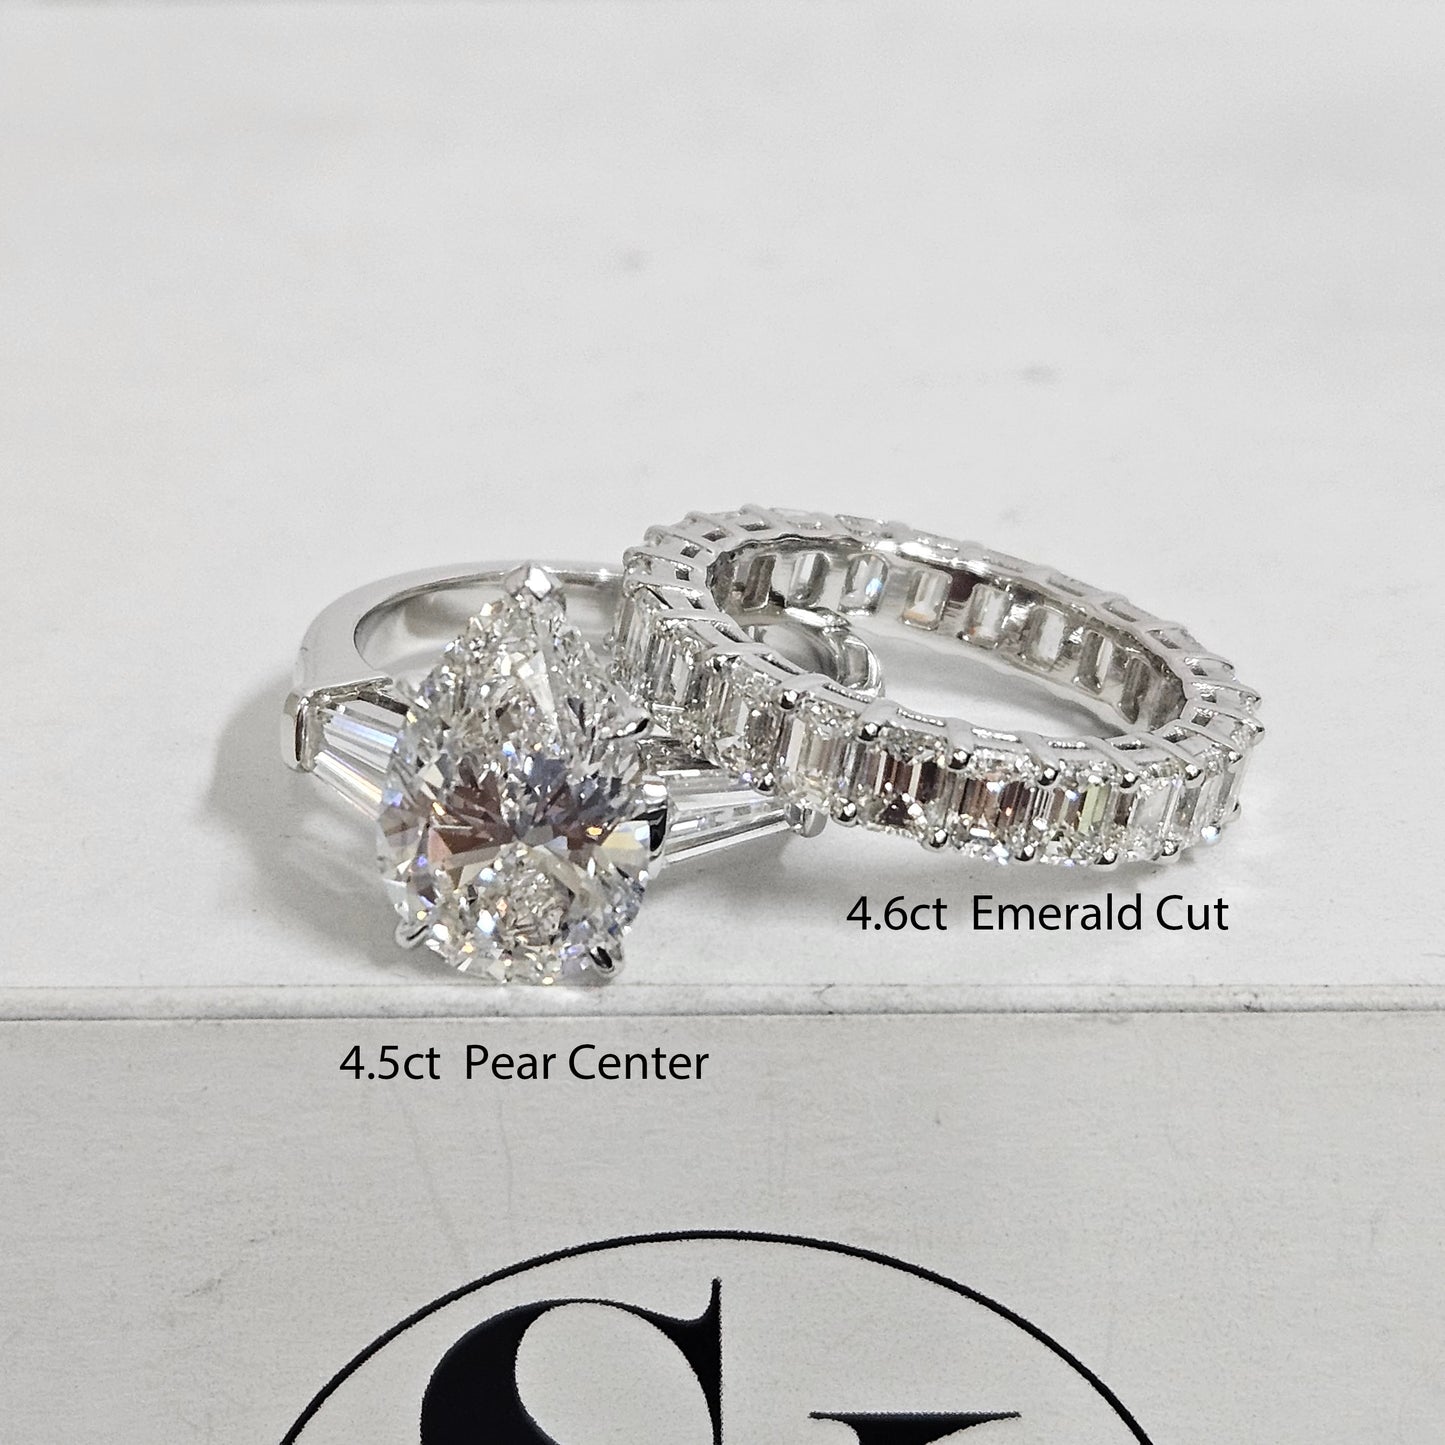 4.5ct Pear Diamond Engagement Ring / lGl Certified Amazing Brilliant Solitaire Stackable Ring/Lab Grown Pear Diamond Ring/Anniversary gift